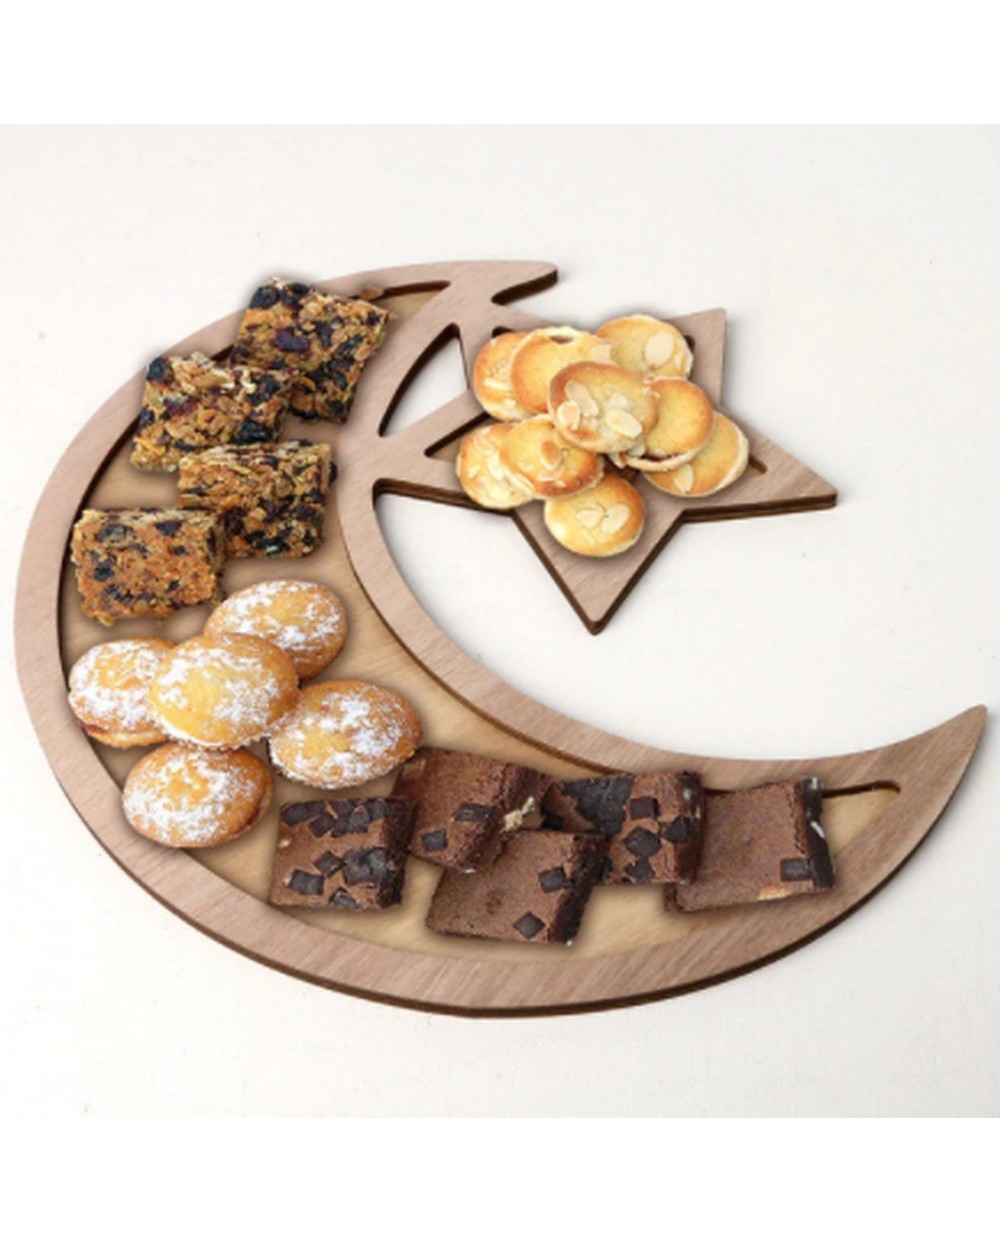 Moon and Star Shaped Wooden Cake Tray